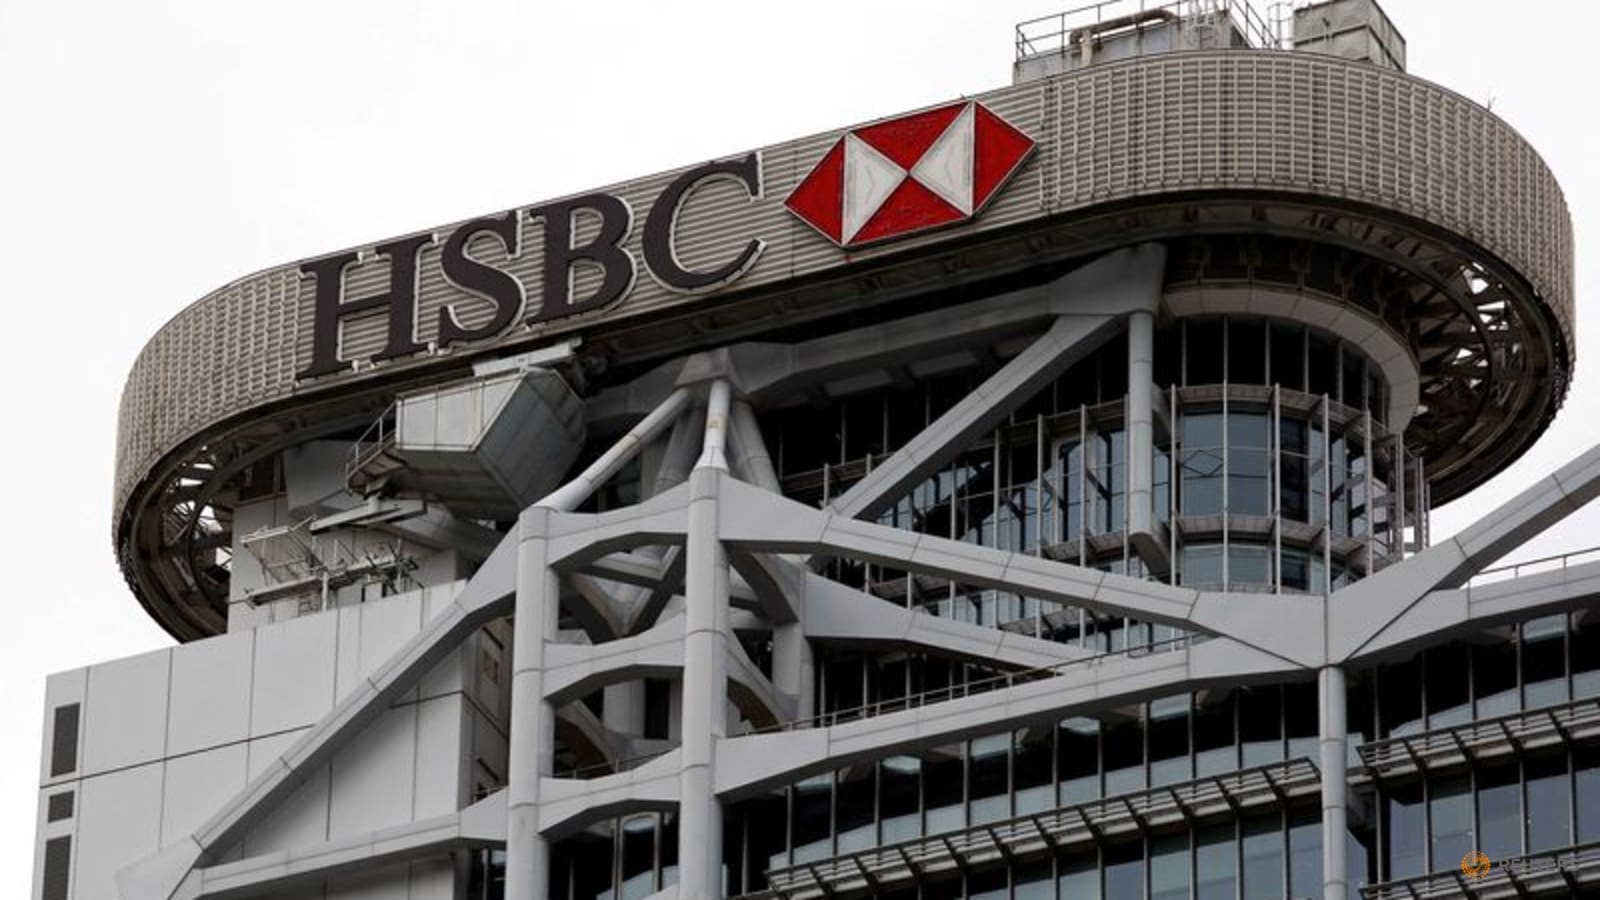 HSBC executive to exit after deploring UK's stance on China - Bloomberg News